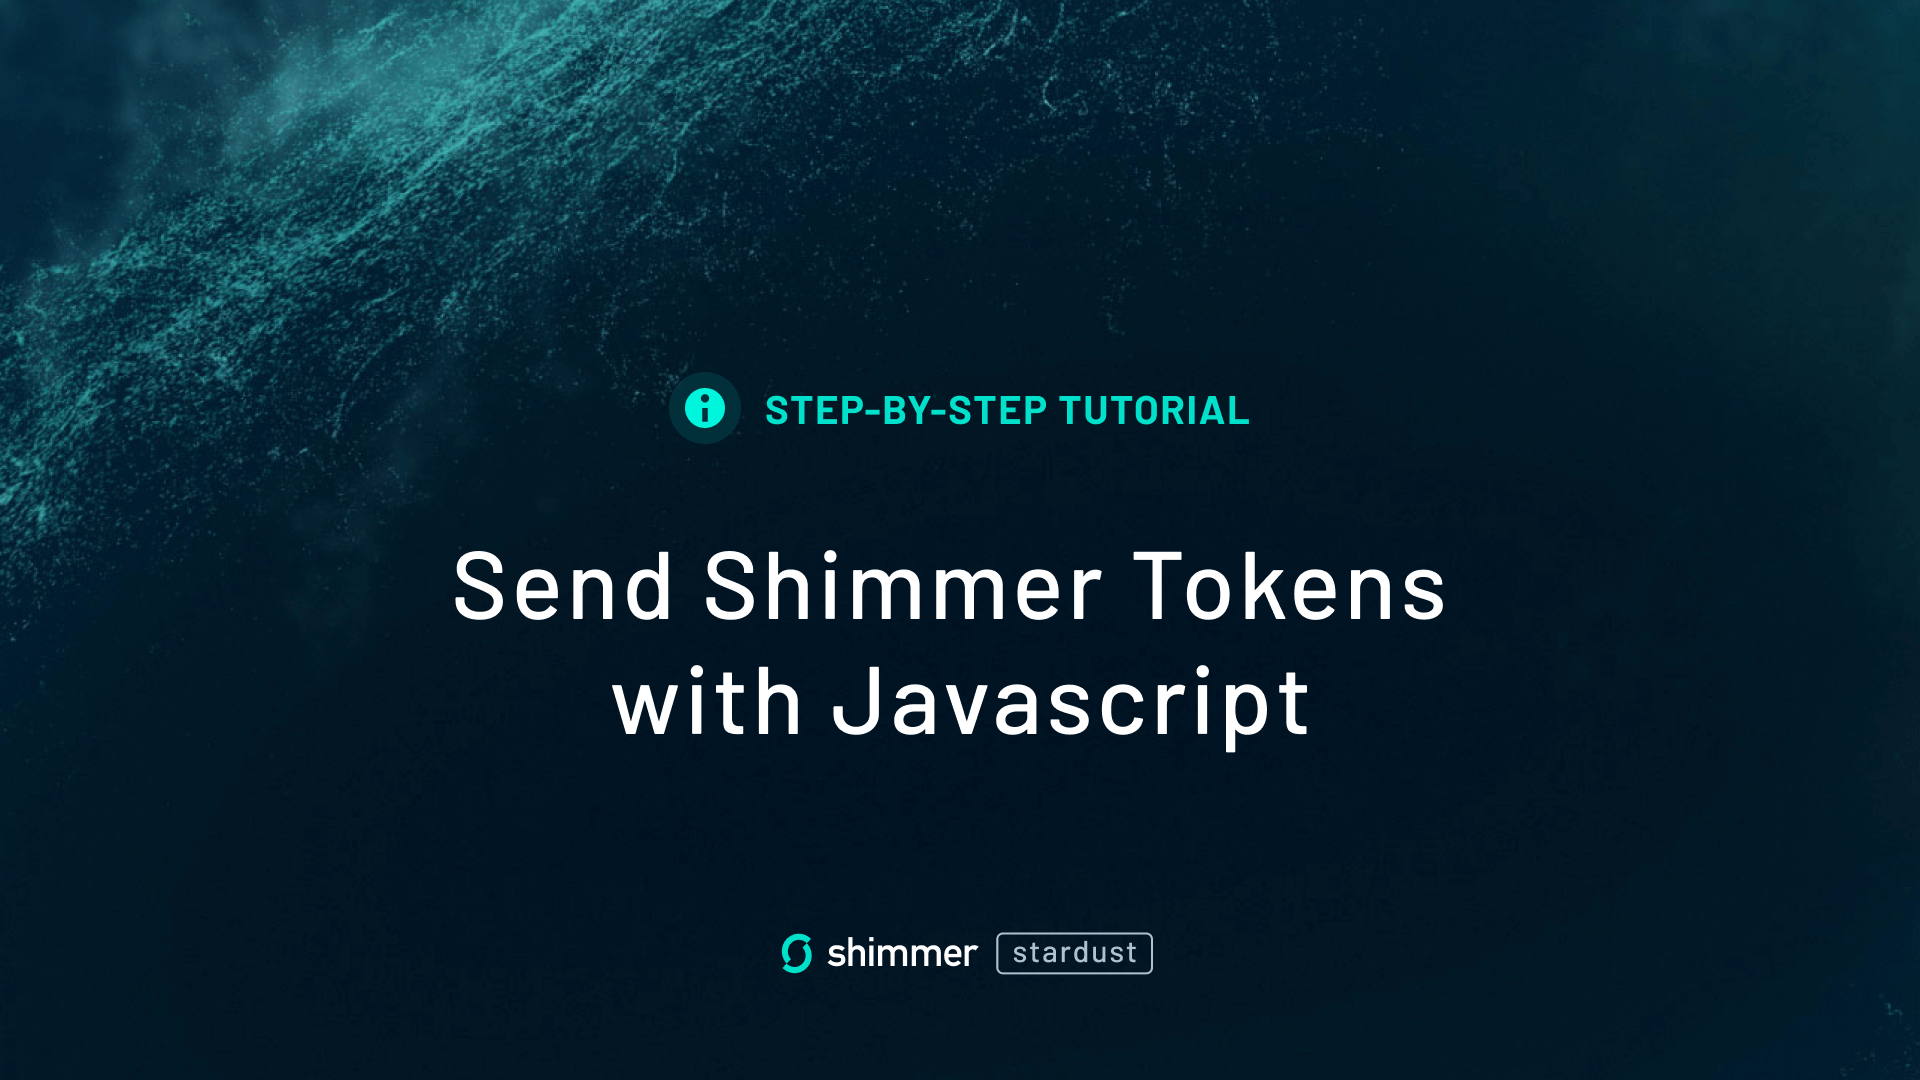 Send Shimmer Tokens with Javascript